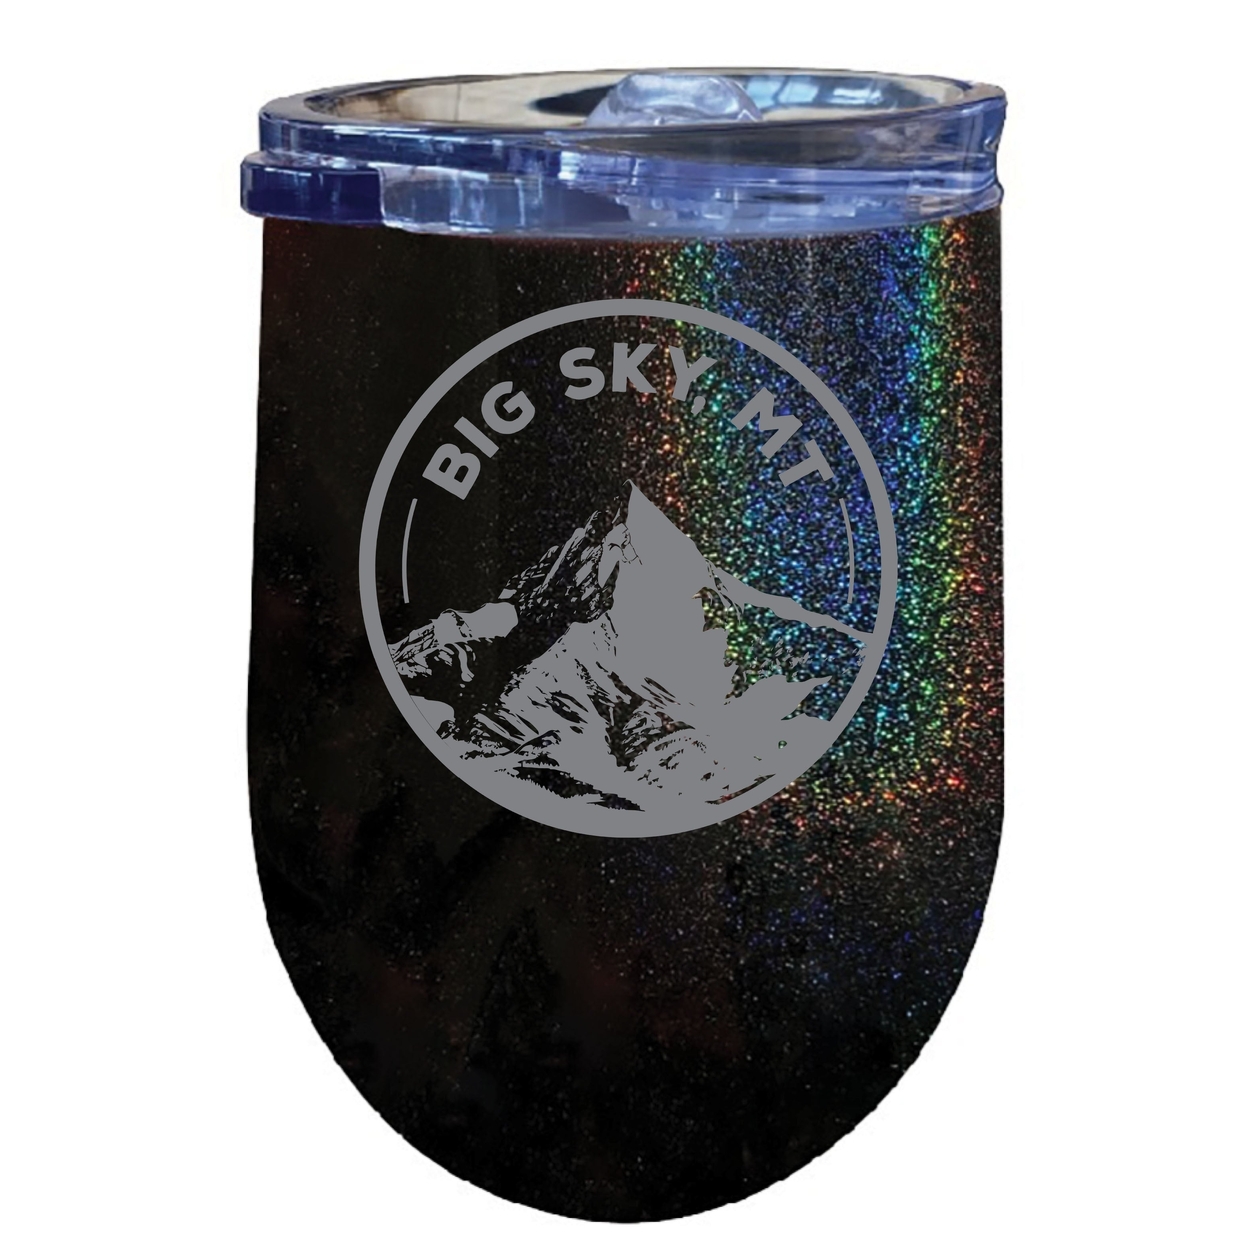 Big Sky Montana Souvenir 12 Oz Engraved Insulated Wine Stainless Steel Tumbler - Rainbow Glitter Gray,,2-Pack